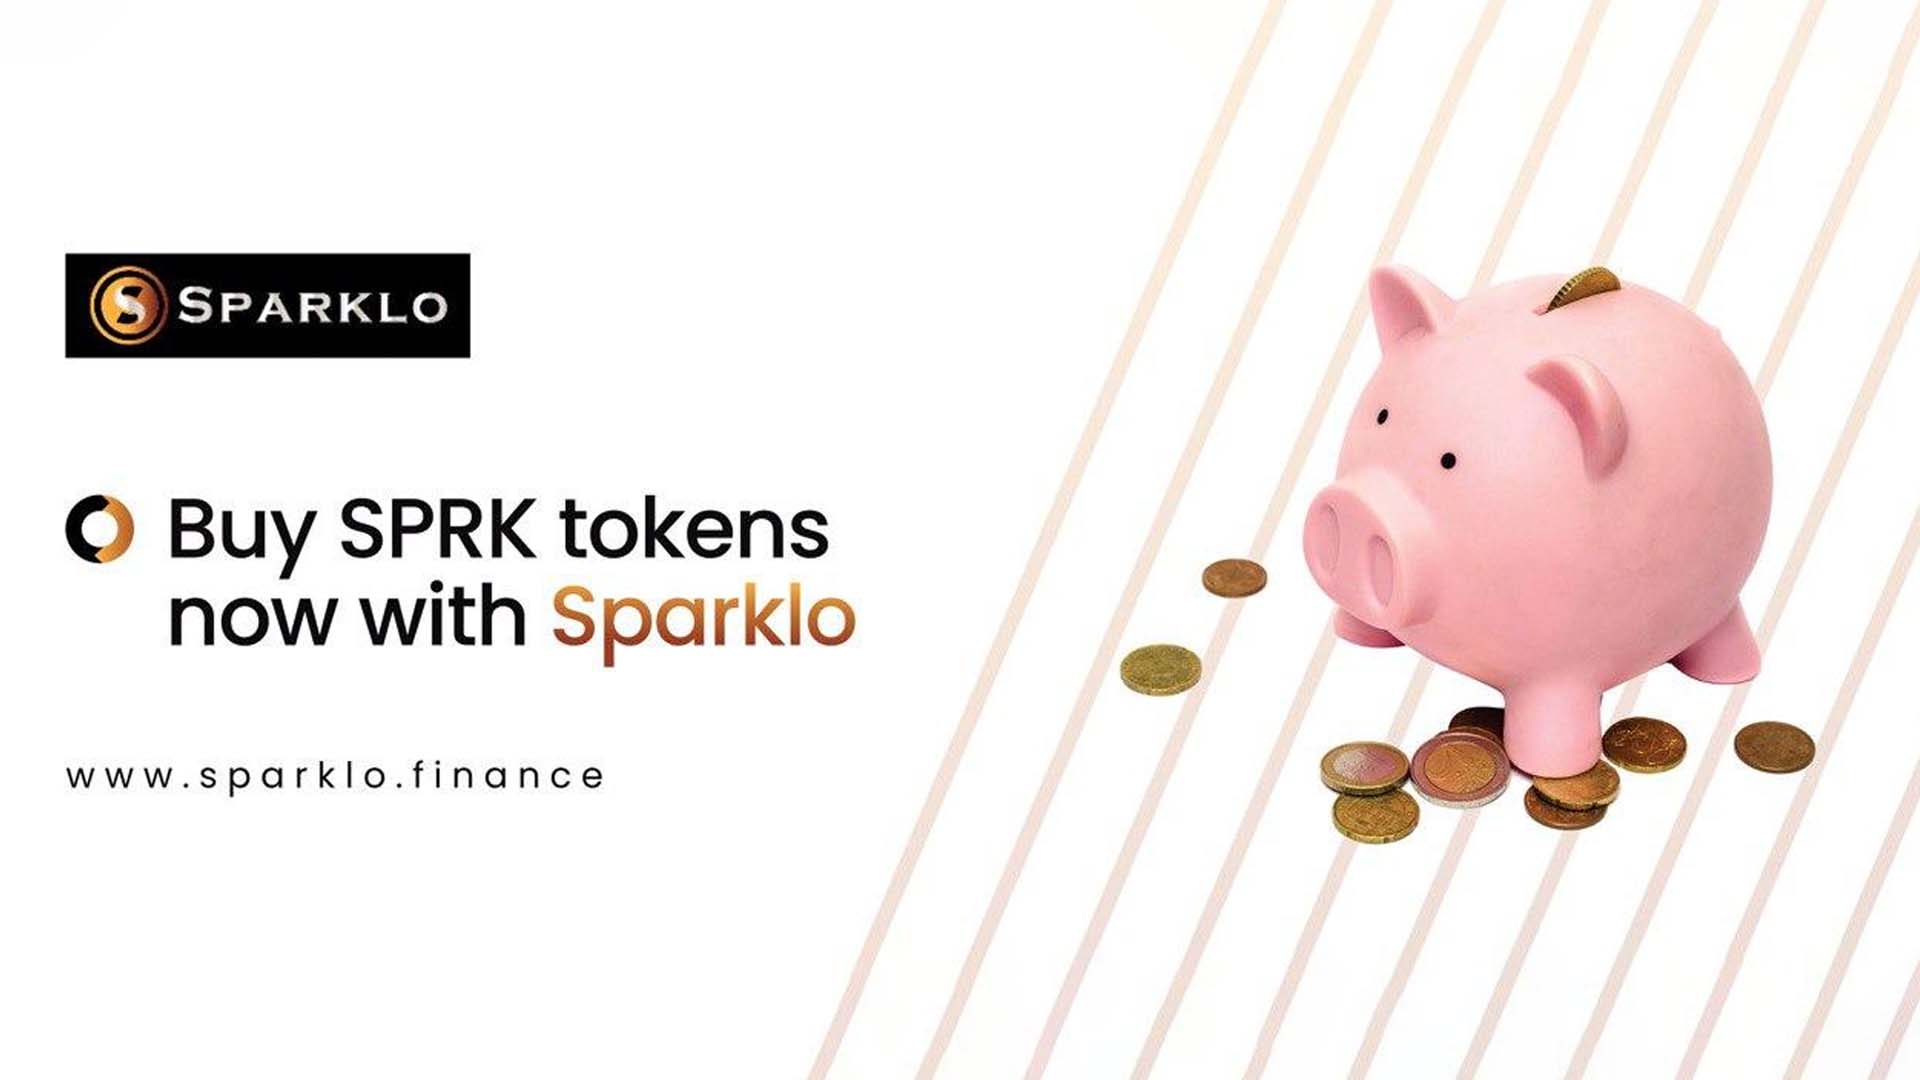 Investors Flee Dipping Filecoin and Sandbox To Join In Sparklo Presale